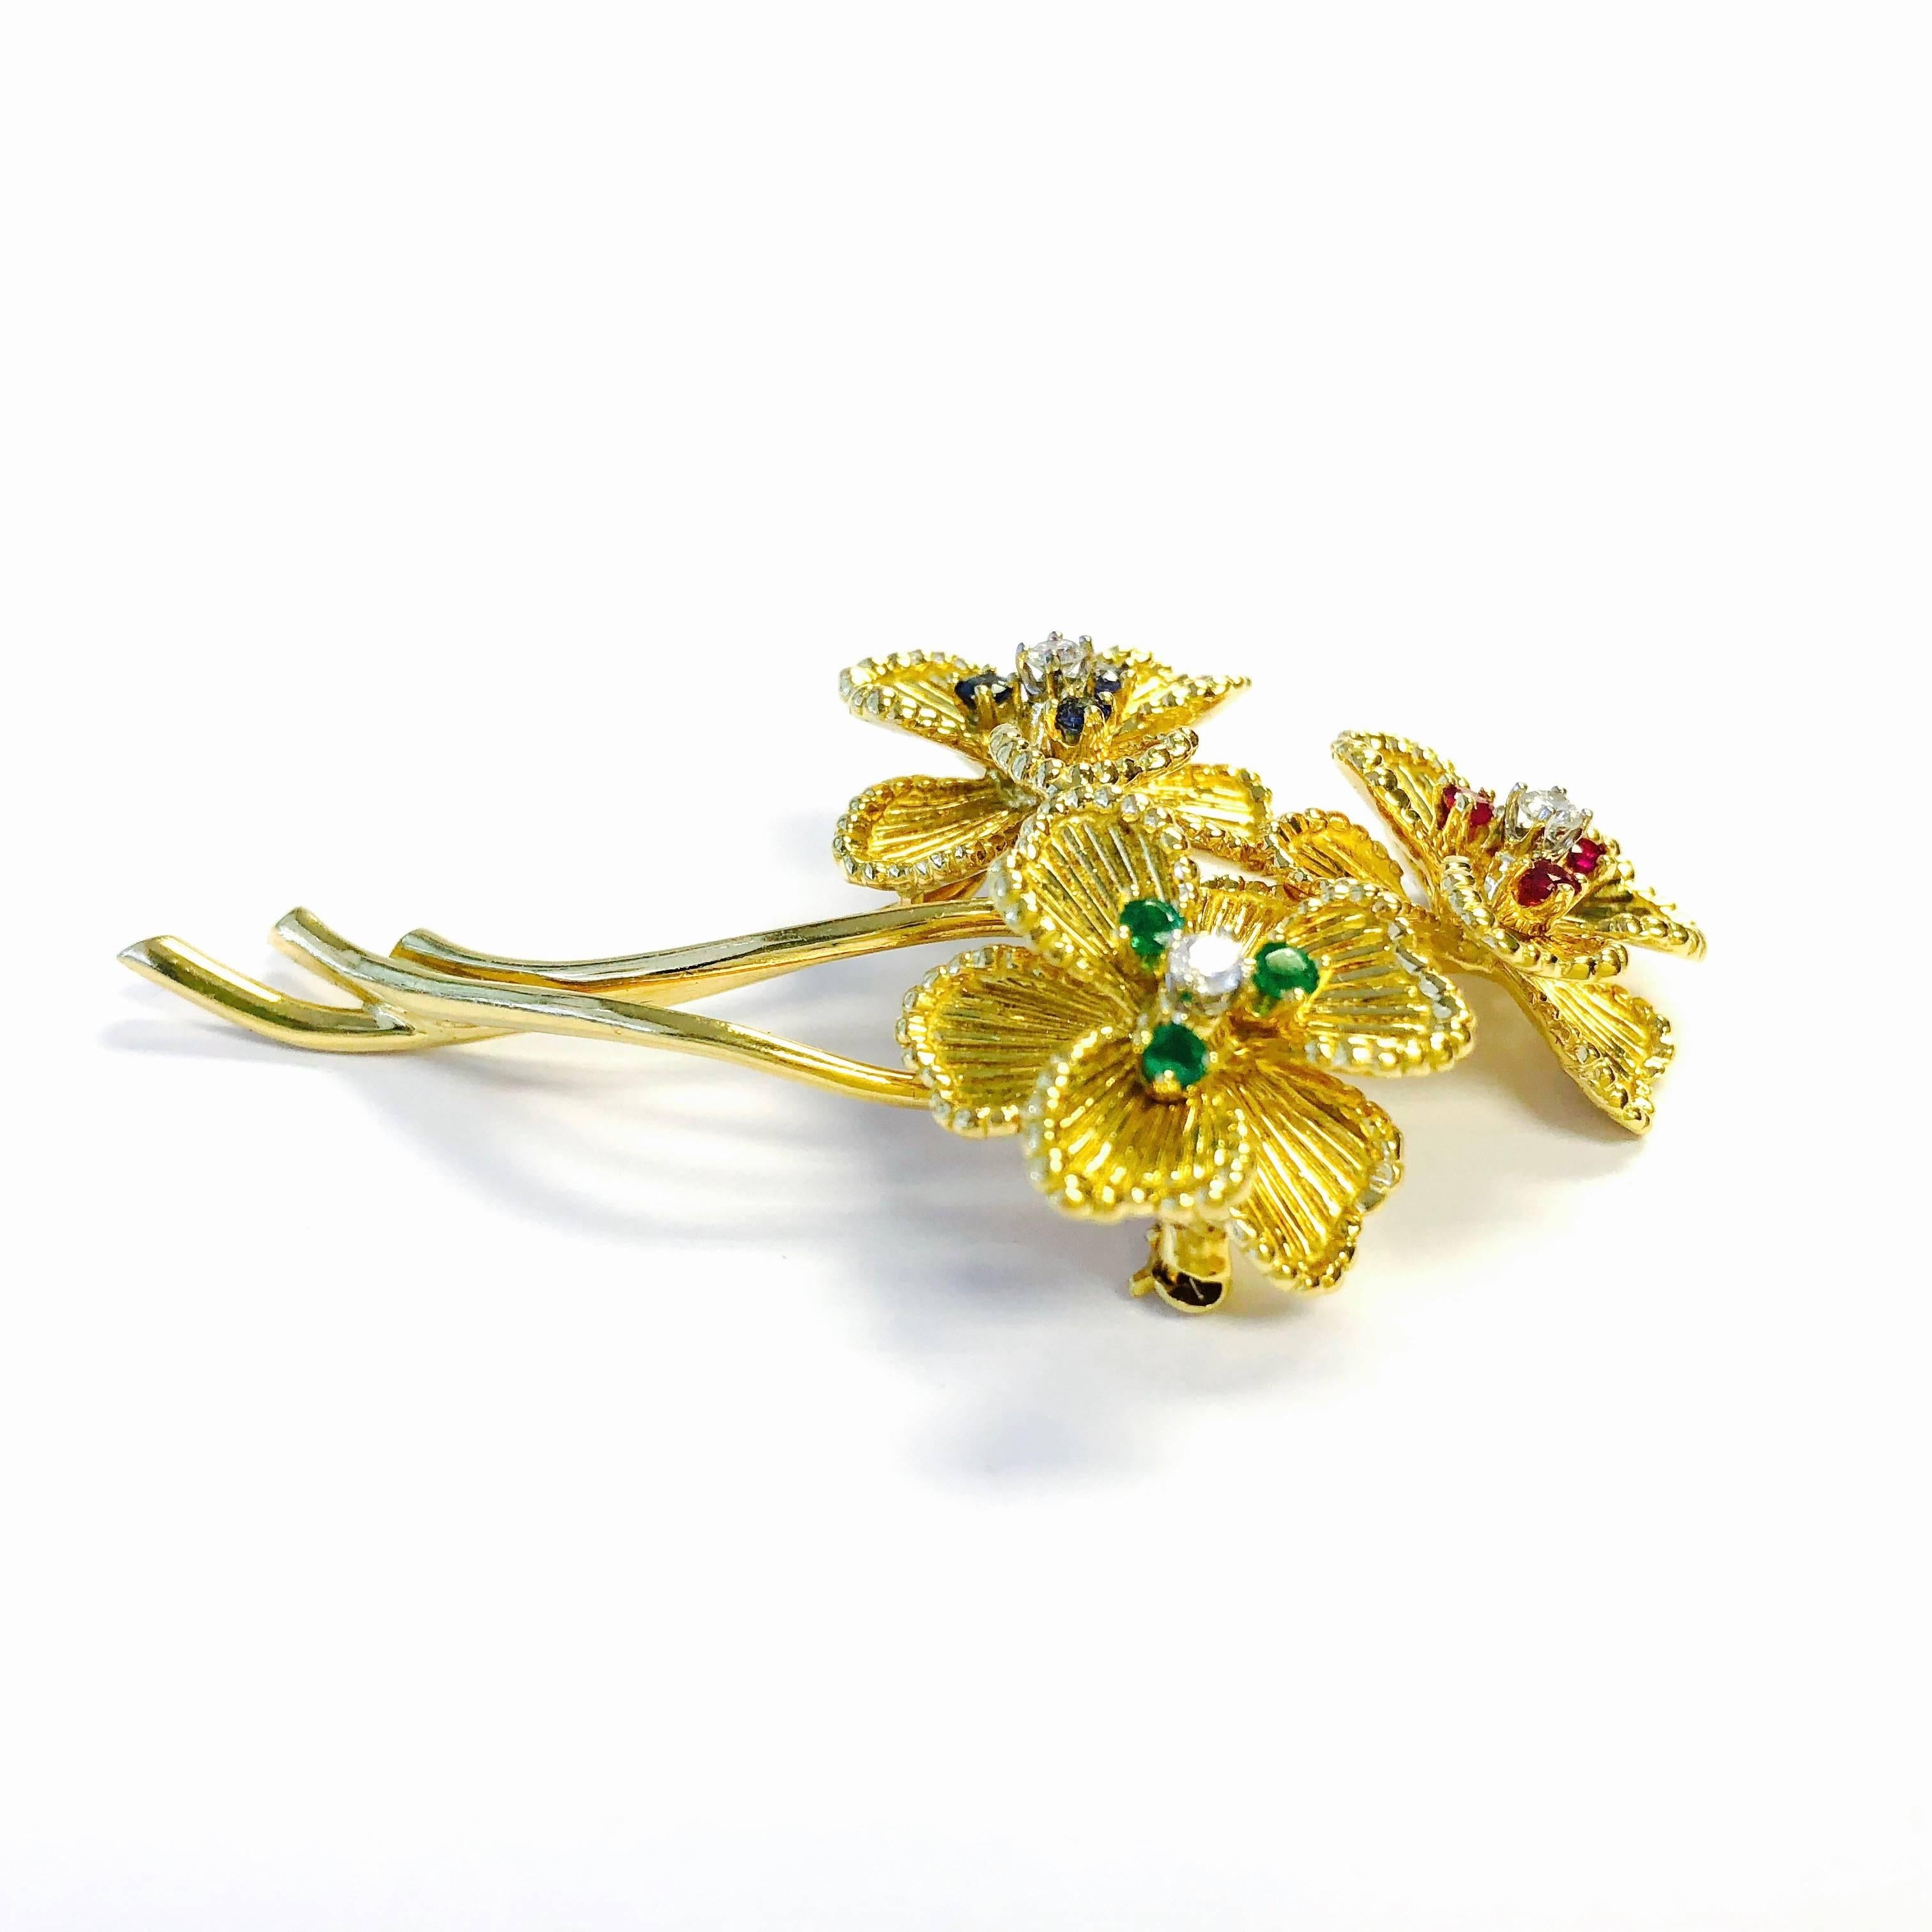 Crafted in 18k yellow gold, featuring 4-stone clusters of diamonds (color: F-G, clarity: VS), emeralds, sapphires and rubies in a triple flower design. 
Marked: 